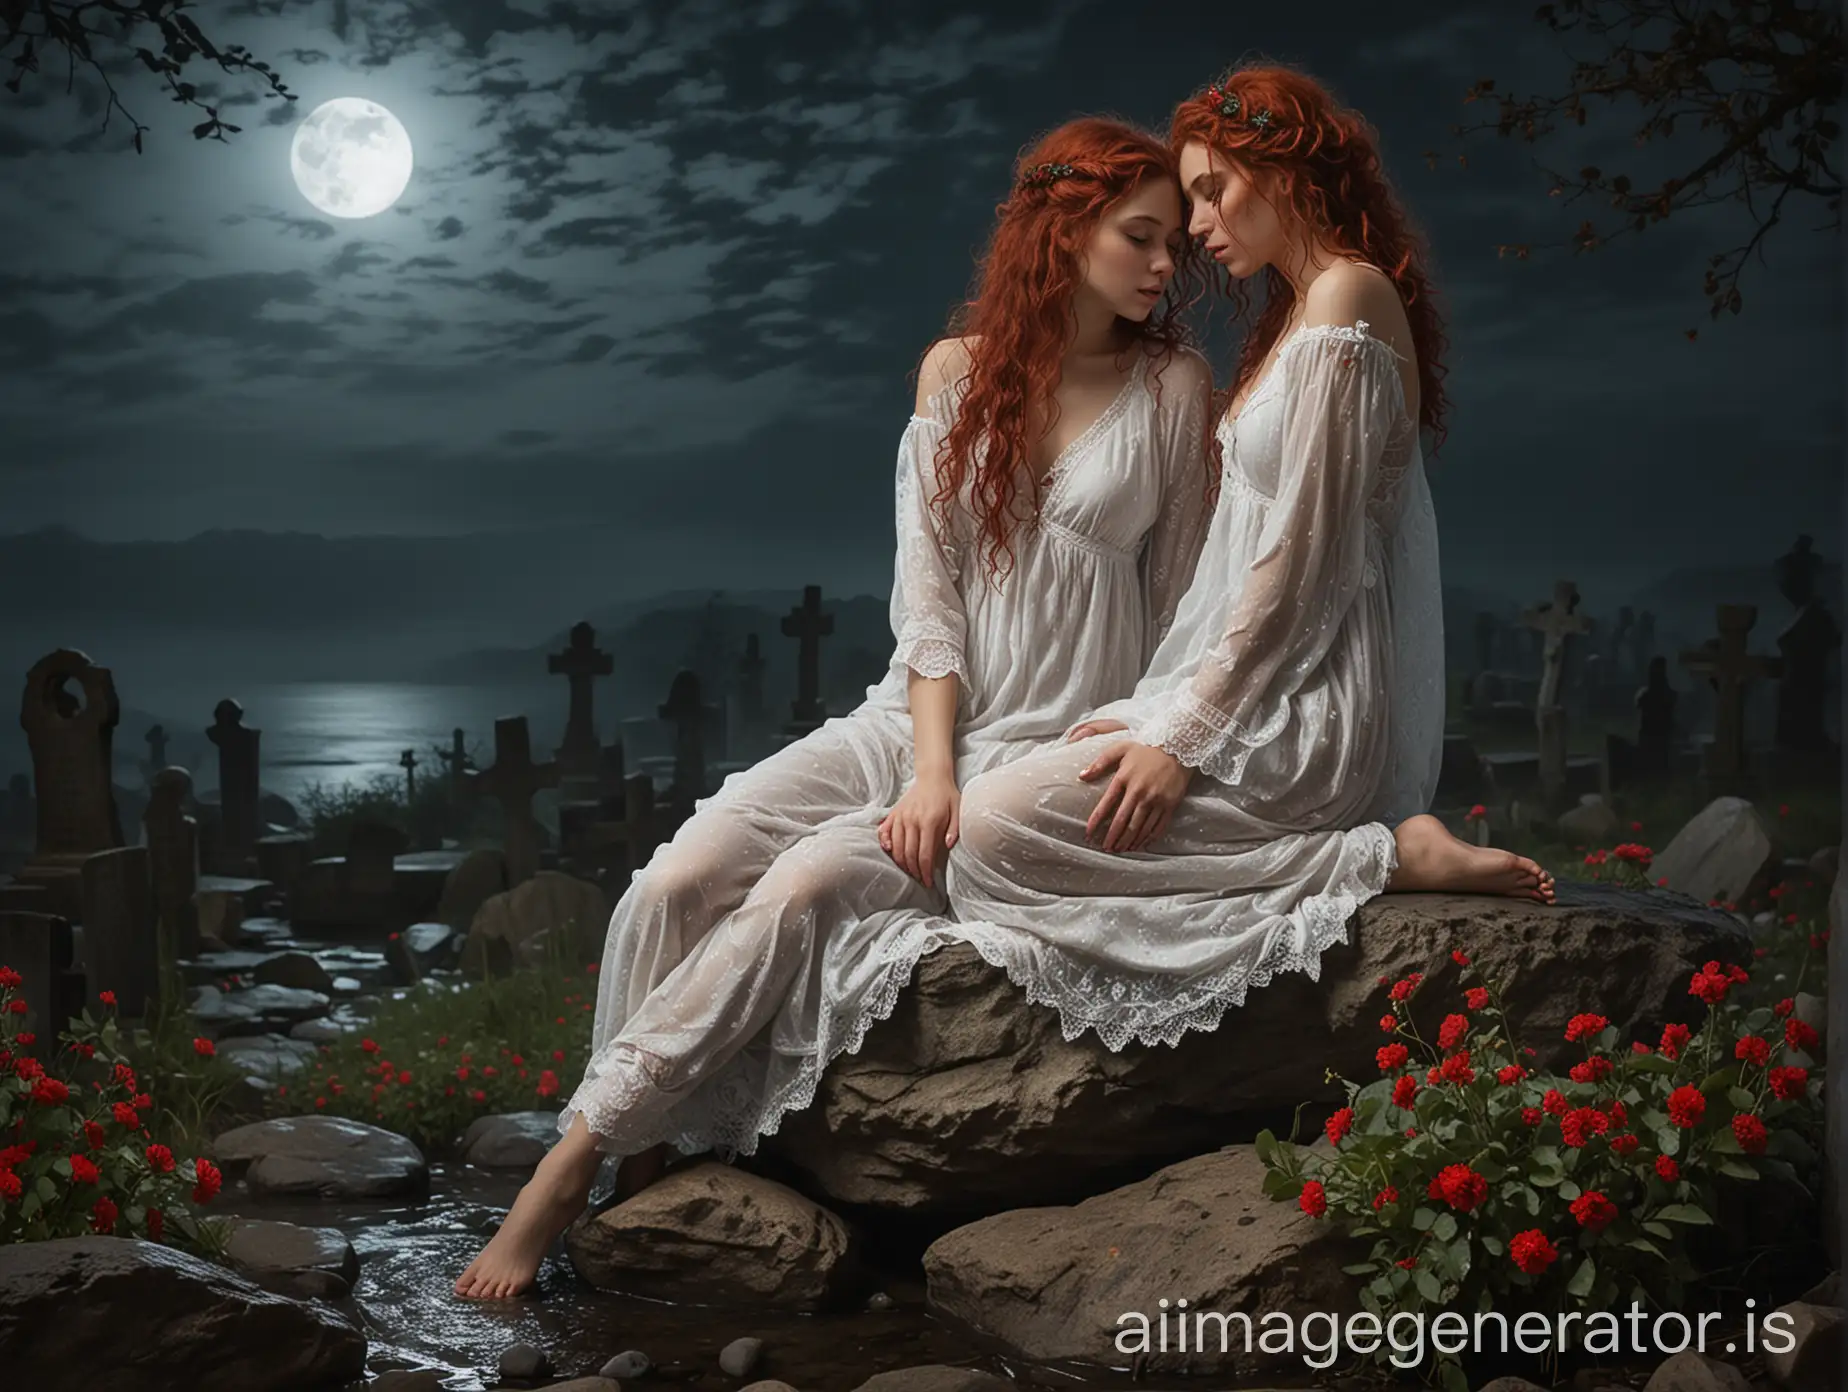 Surreal-Gothic-Art-Ethereal-Women-Embrace-in-Moonlit-Graveyard